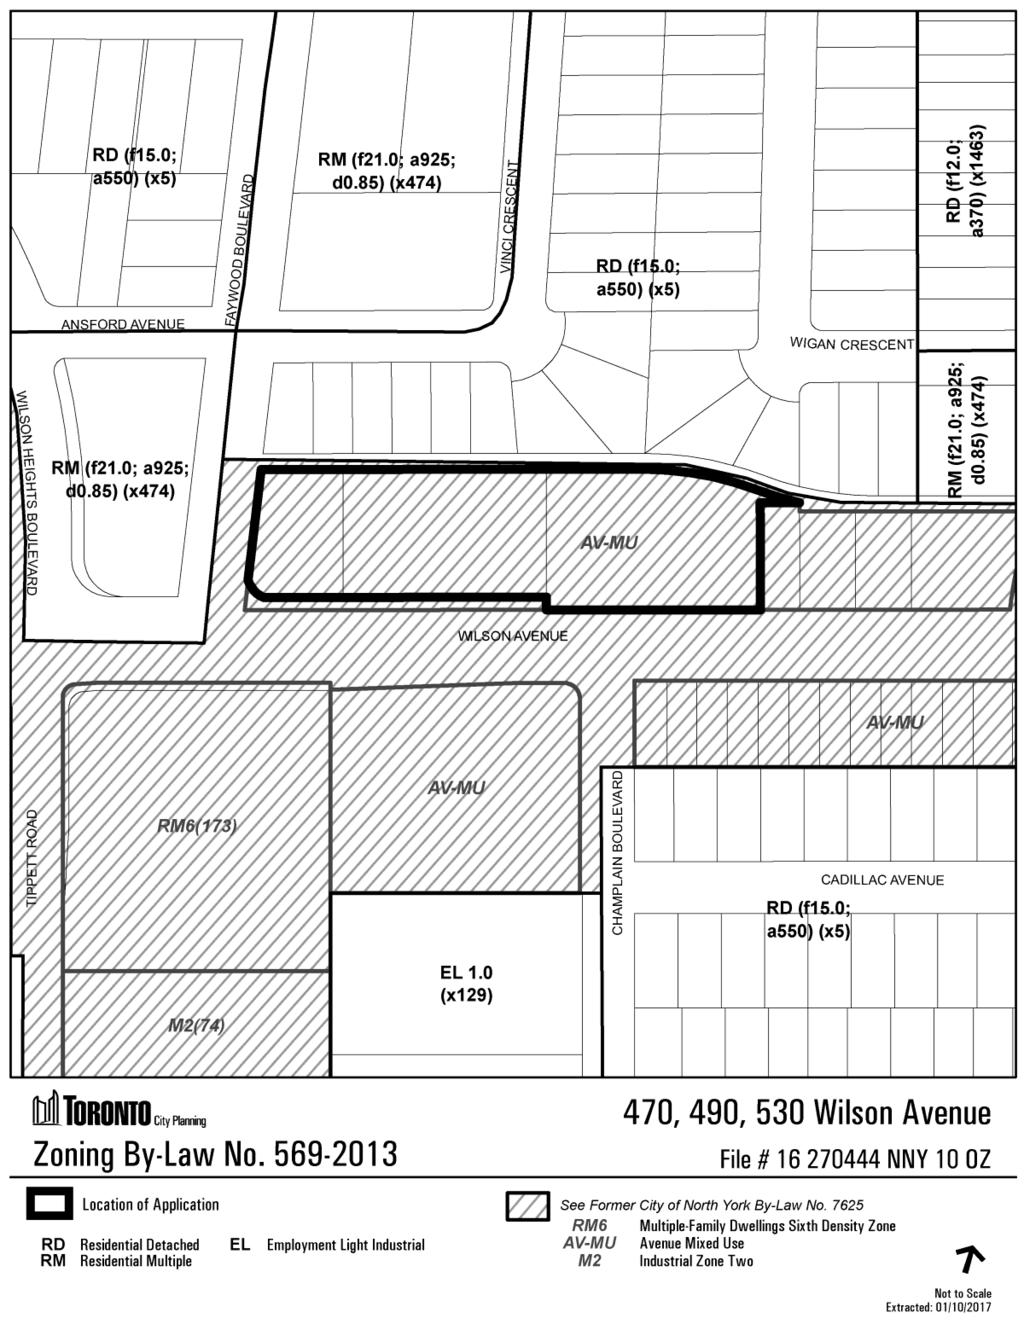 Attachment 3: Zoning By-law 7625 Staff report for